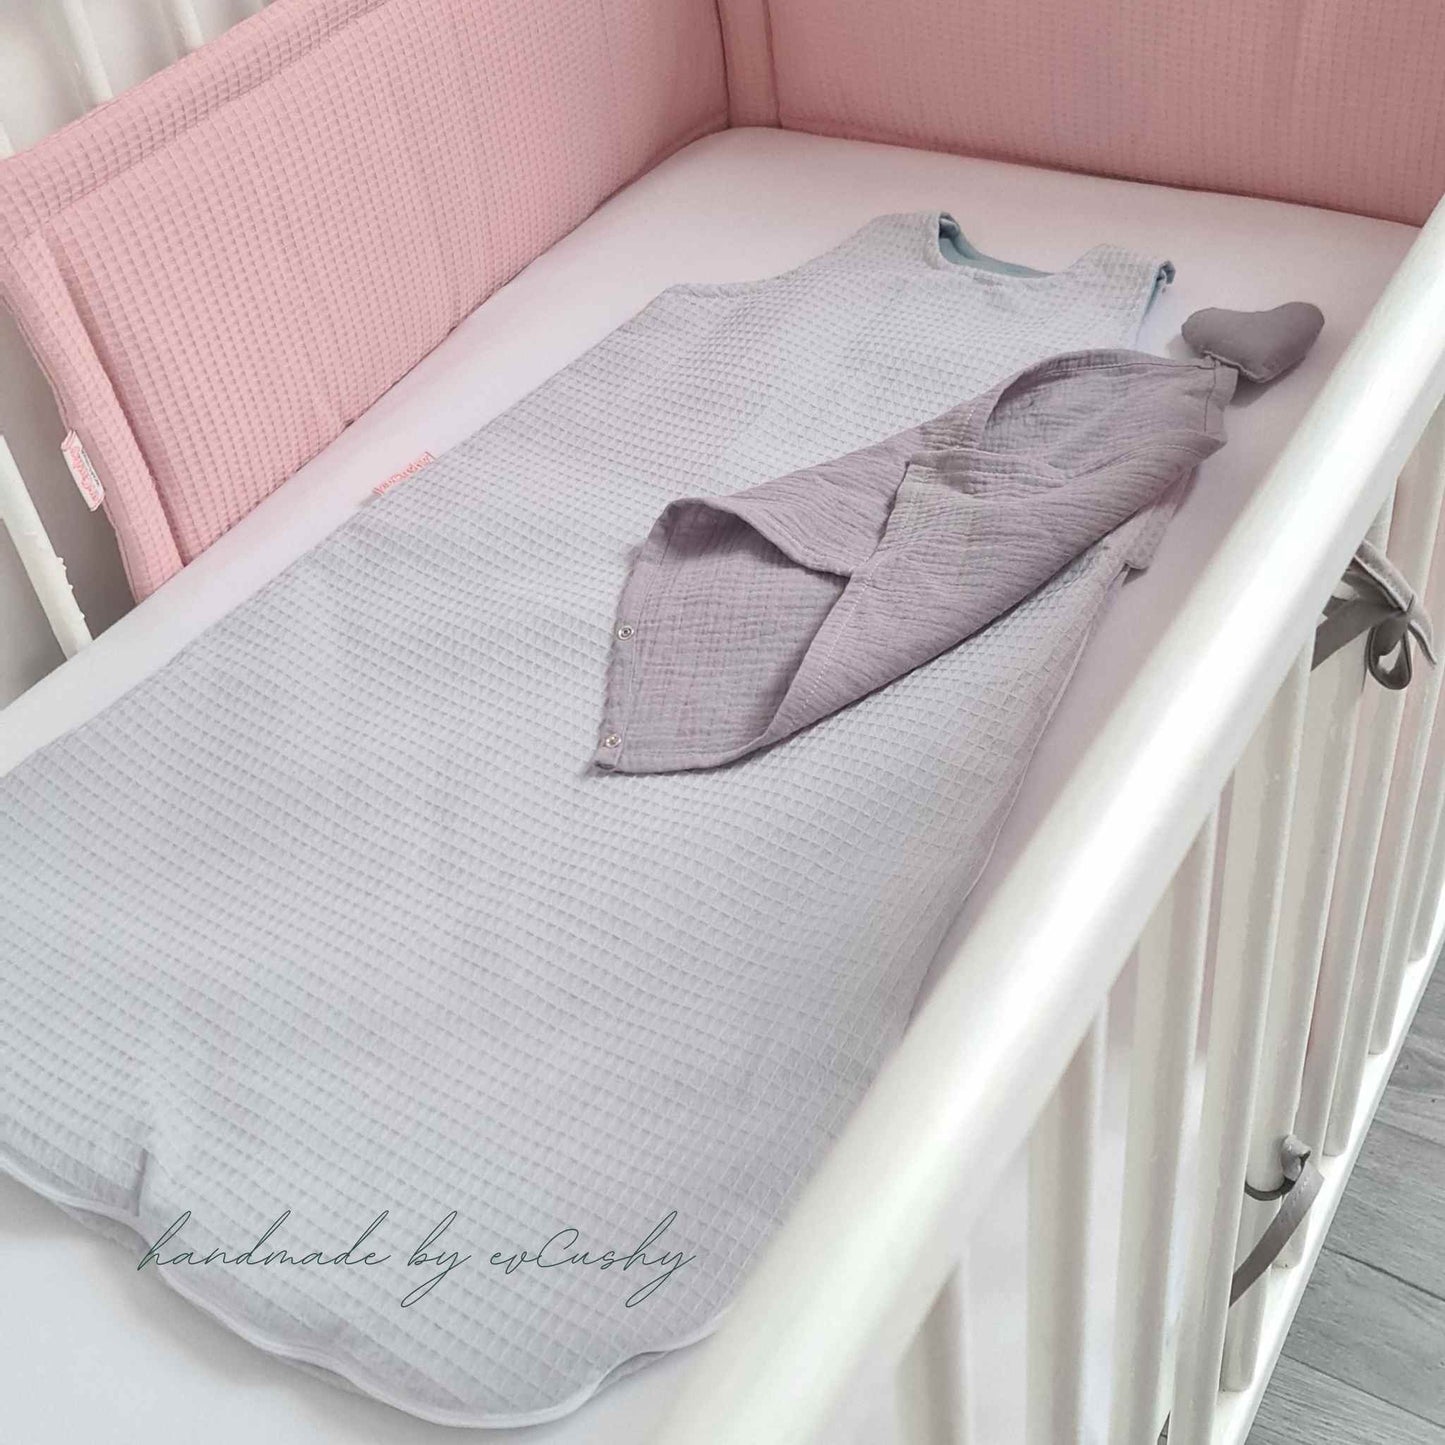 plain sleeping bag for baby pink , 100% cotton 6-18 months in Ireland 90cm long